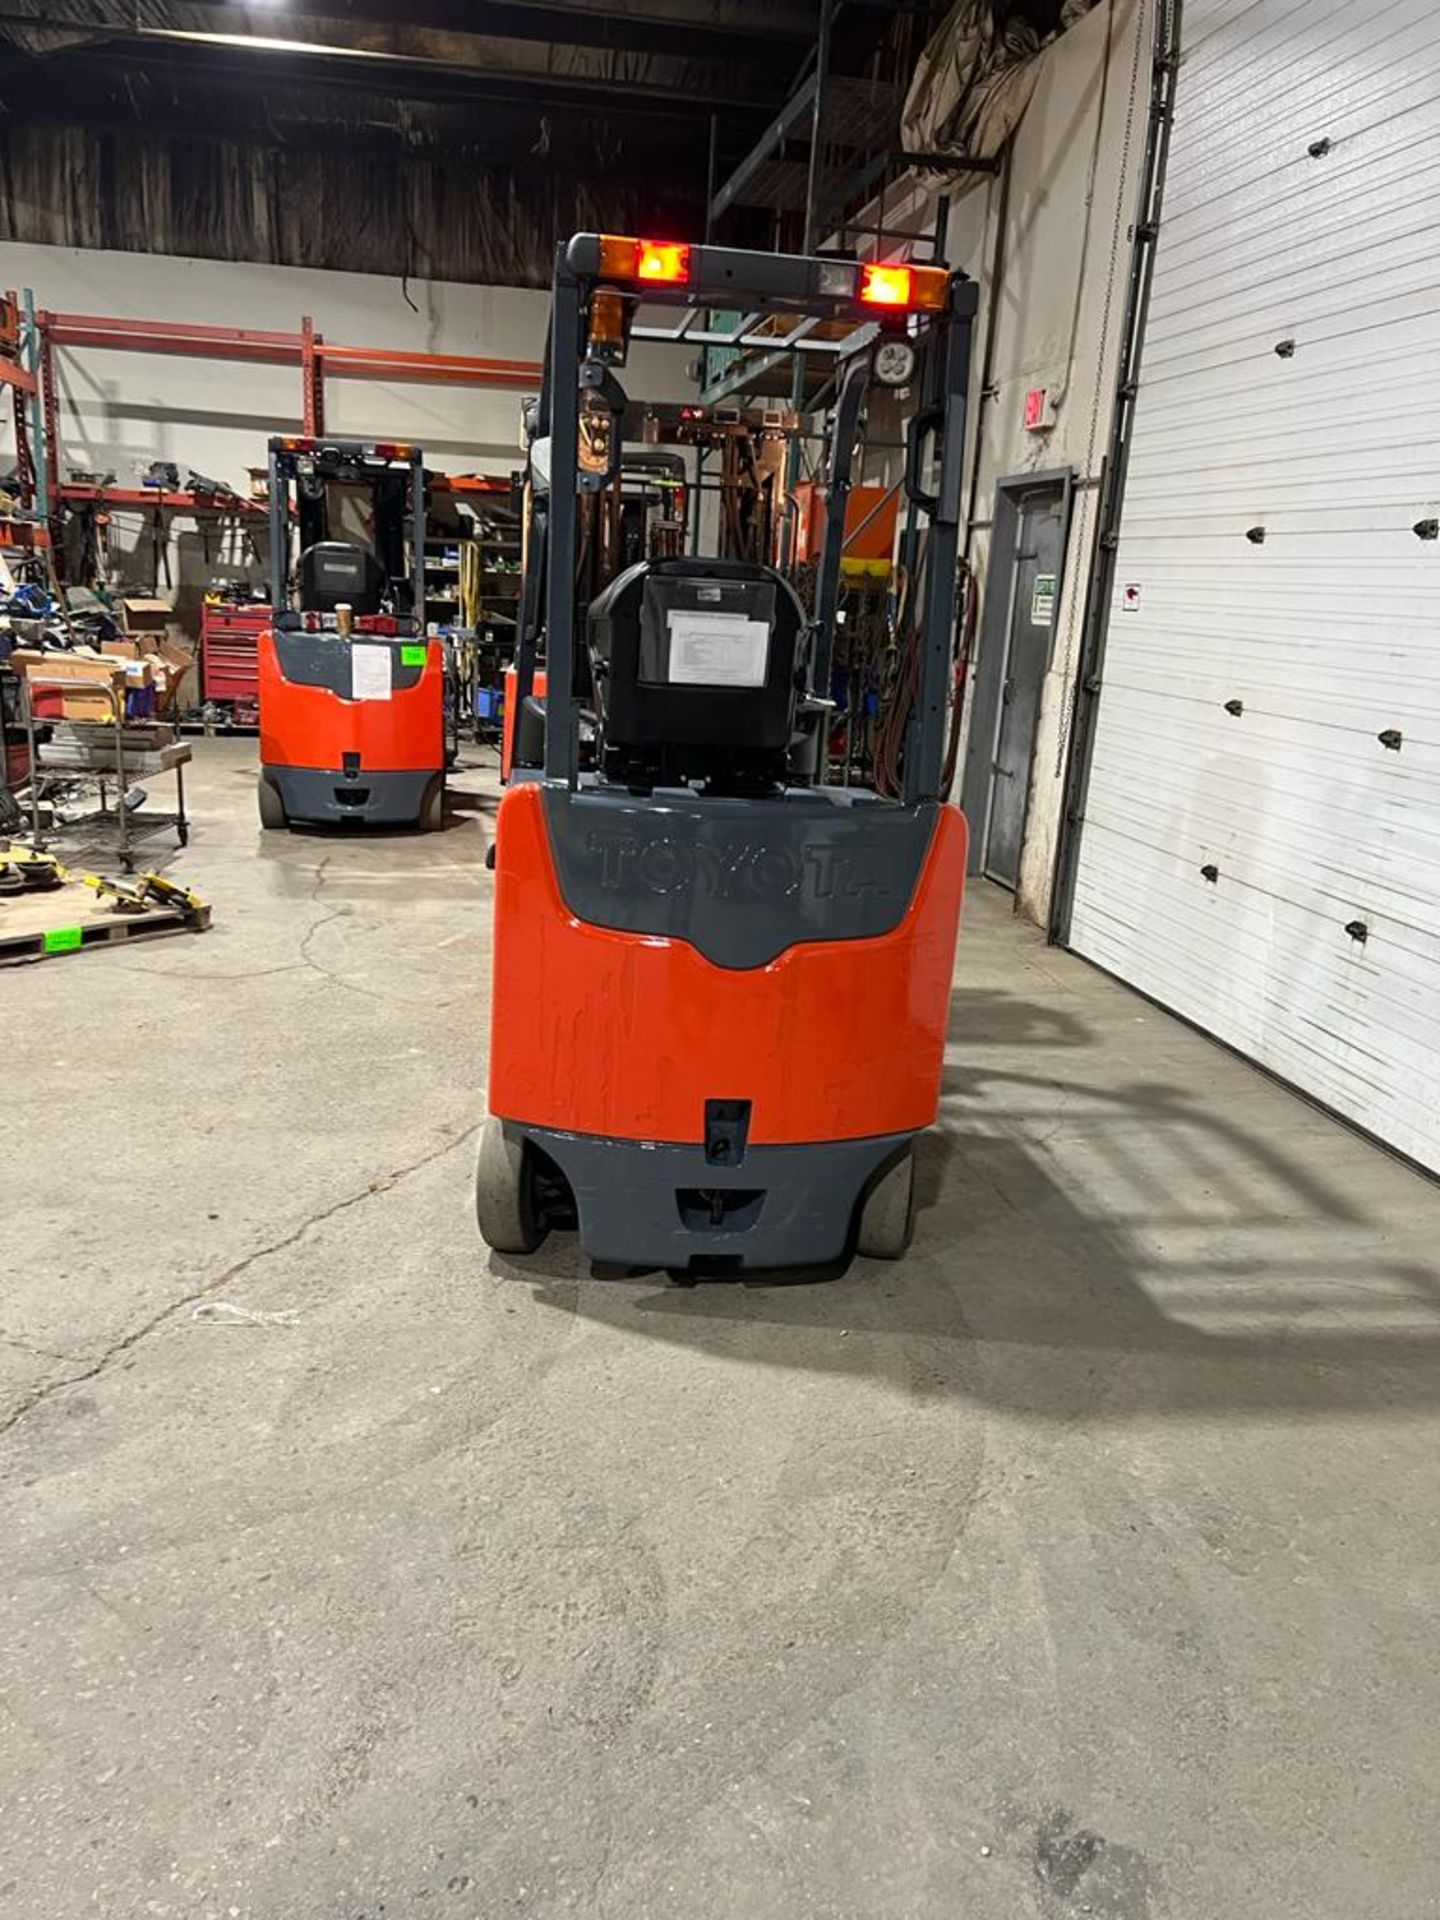 2014 Toyota 5,000lbs Capacity Forklift Electric 48V with 48" FORKS with Sideshift & Plumbed for Fork - Image 4 of 5